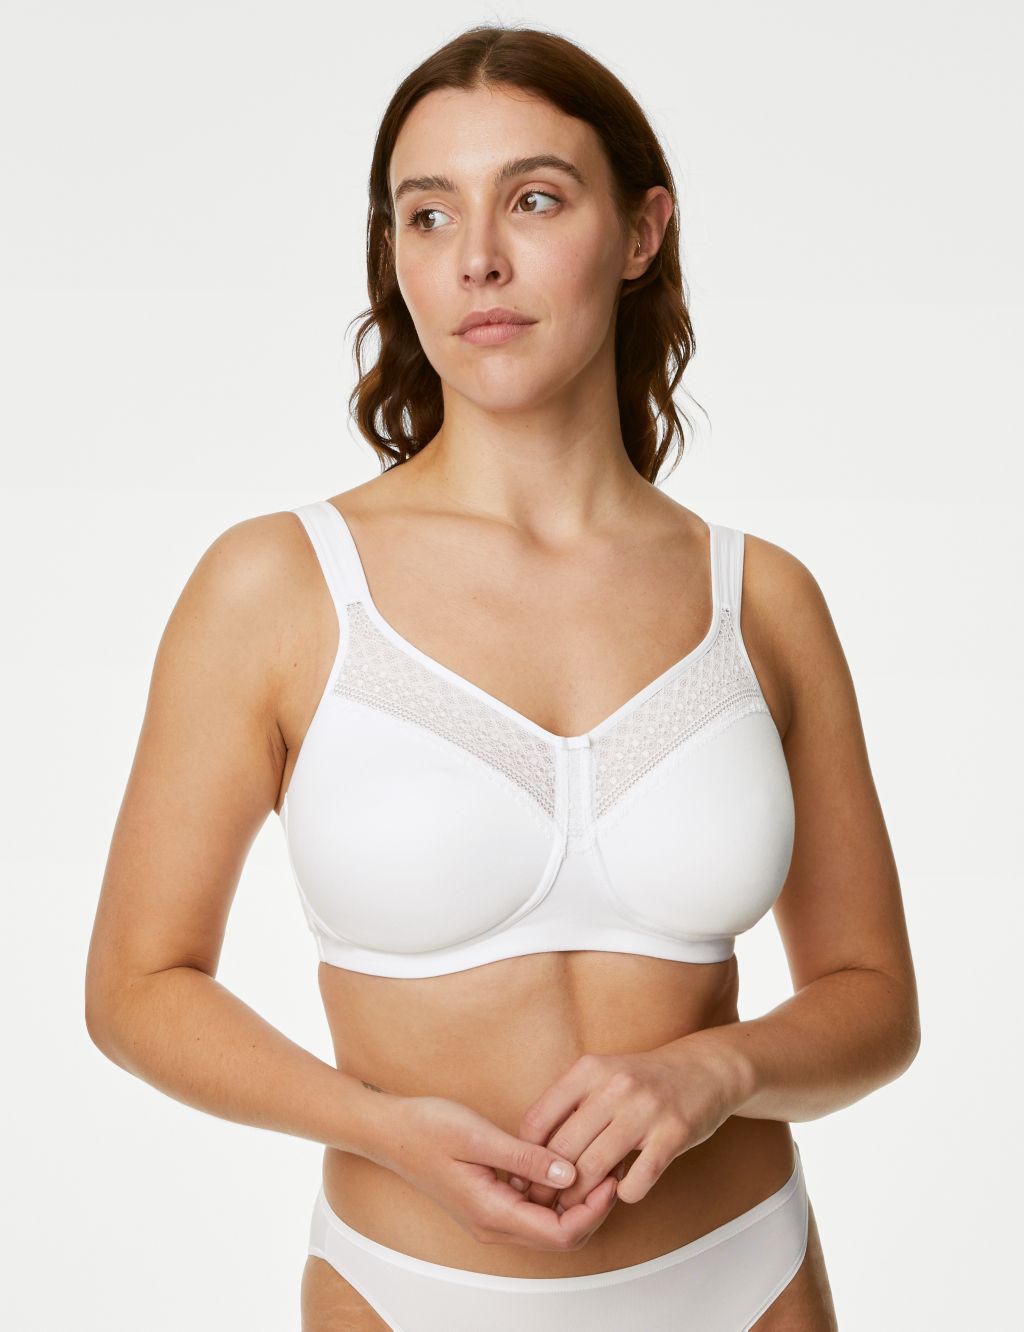 M&S Ladies Ivory Grey Full Cup Bra 42A Underwired, Delicate Mesh Lace,  Brand NEW